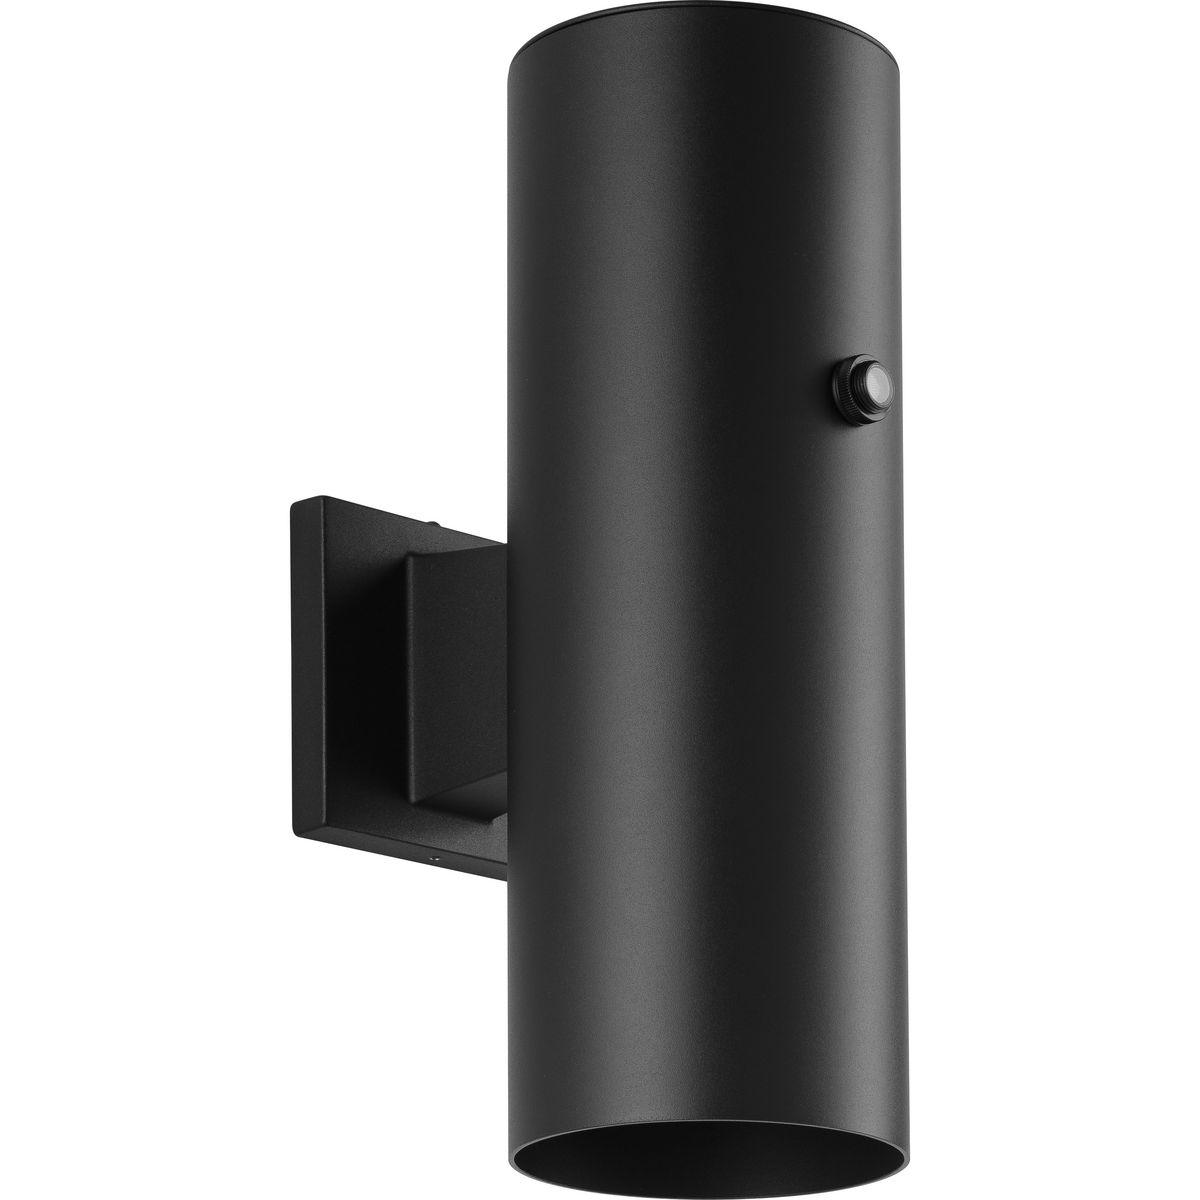 Hubbell P550102-031-30 Embrace a minimalist style with the Cylinder Collection 1-Light 5-Inch Black Modern Outdoor LED Large Up/Down Wall Lantern Light.The sleek cylindrical shade and square backplate are coated in a classic black finish. Energy efficiency from the LEDs is enha